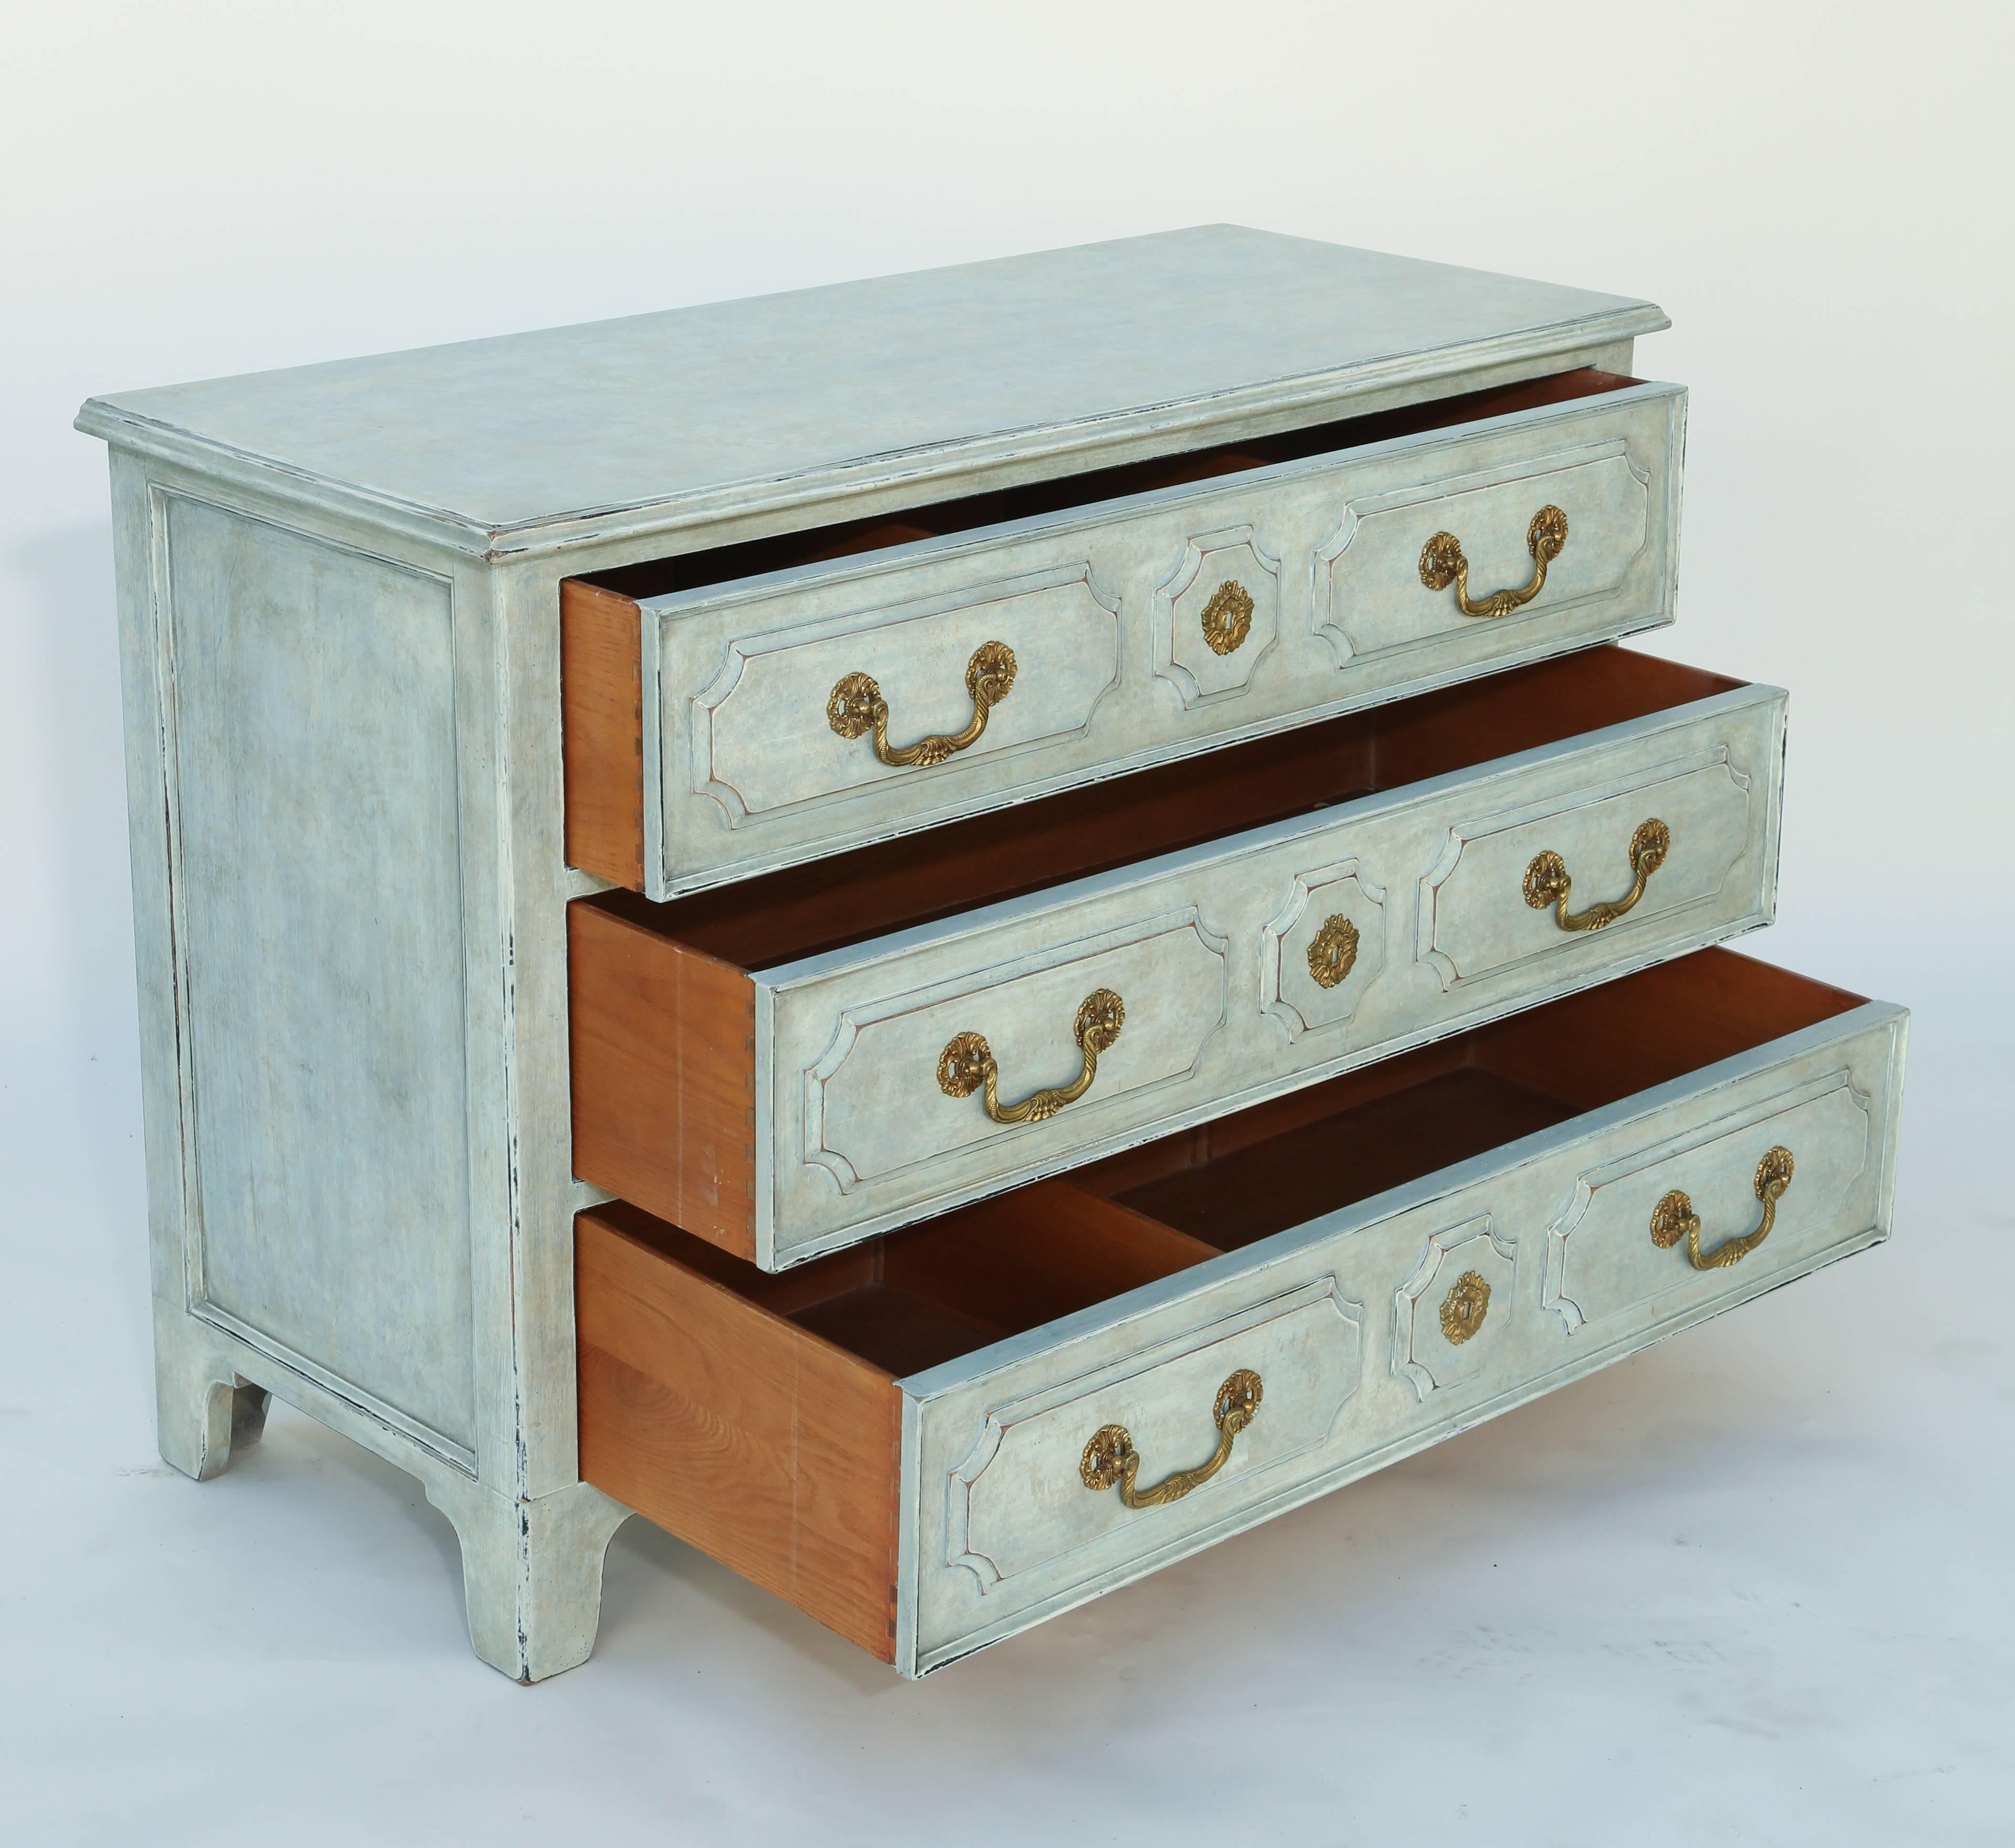 Chest of three drawers, having a mottled painted finish in light blue, its molded rectangular top on stacked raised panelled drawers with brass escutcheons and pulls with fielded sides, raised on bracket feet.

Stock ID: D6984